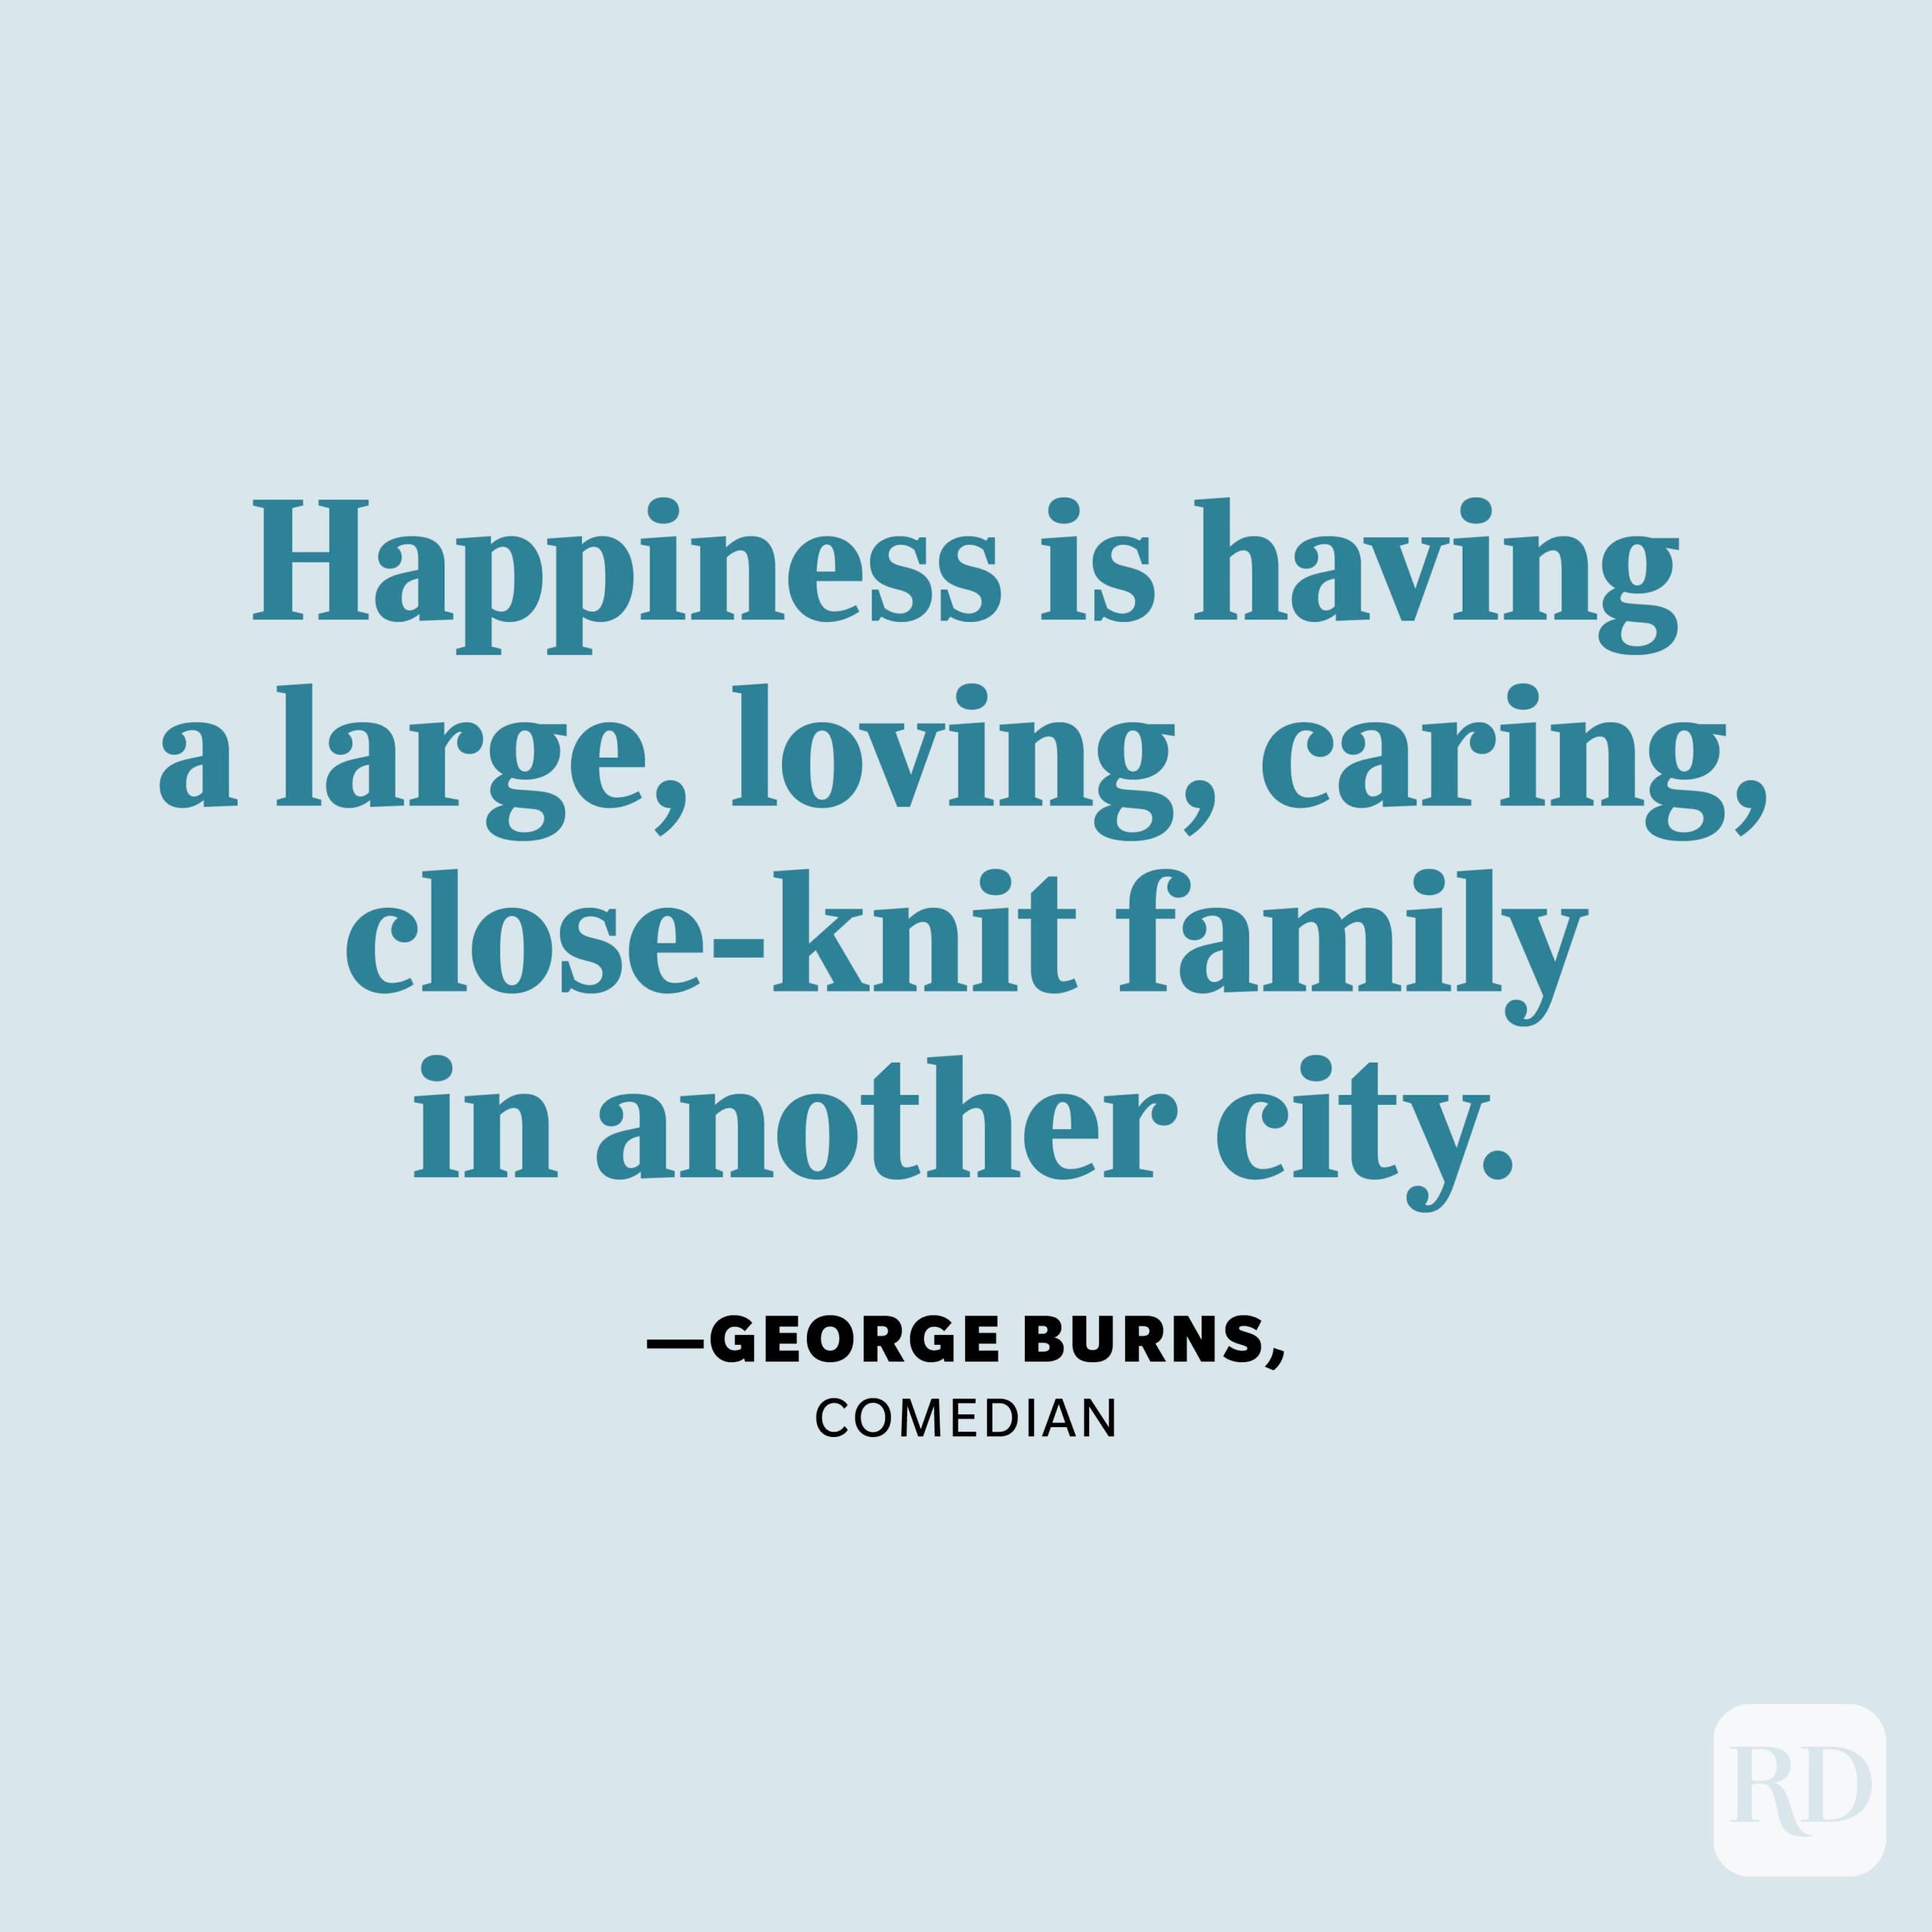 "Happiness is having a large, loving, caring, close-knit family in another city." —George Burns, comedian